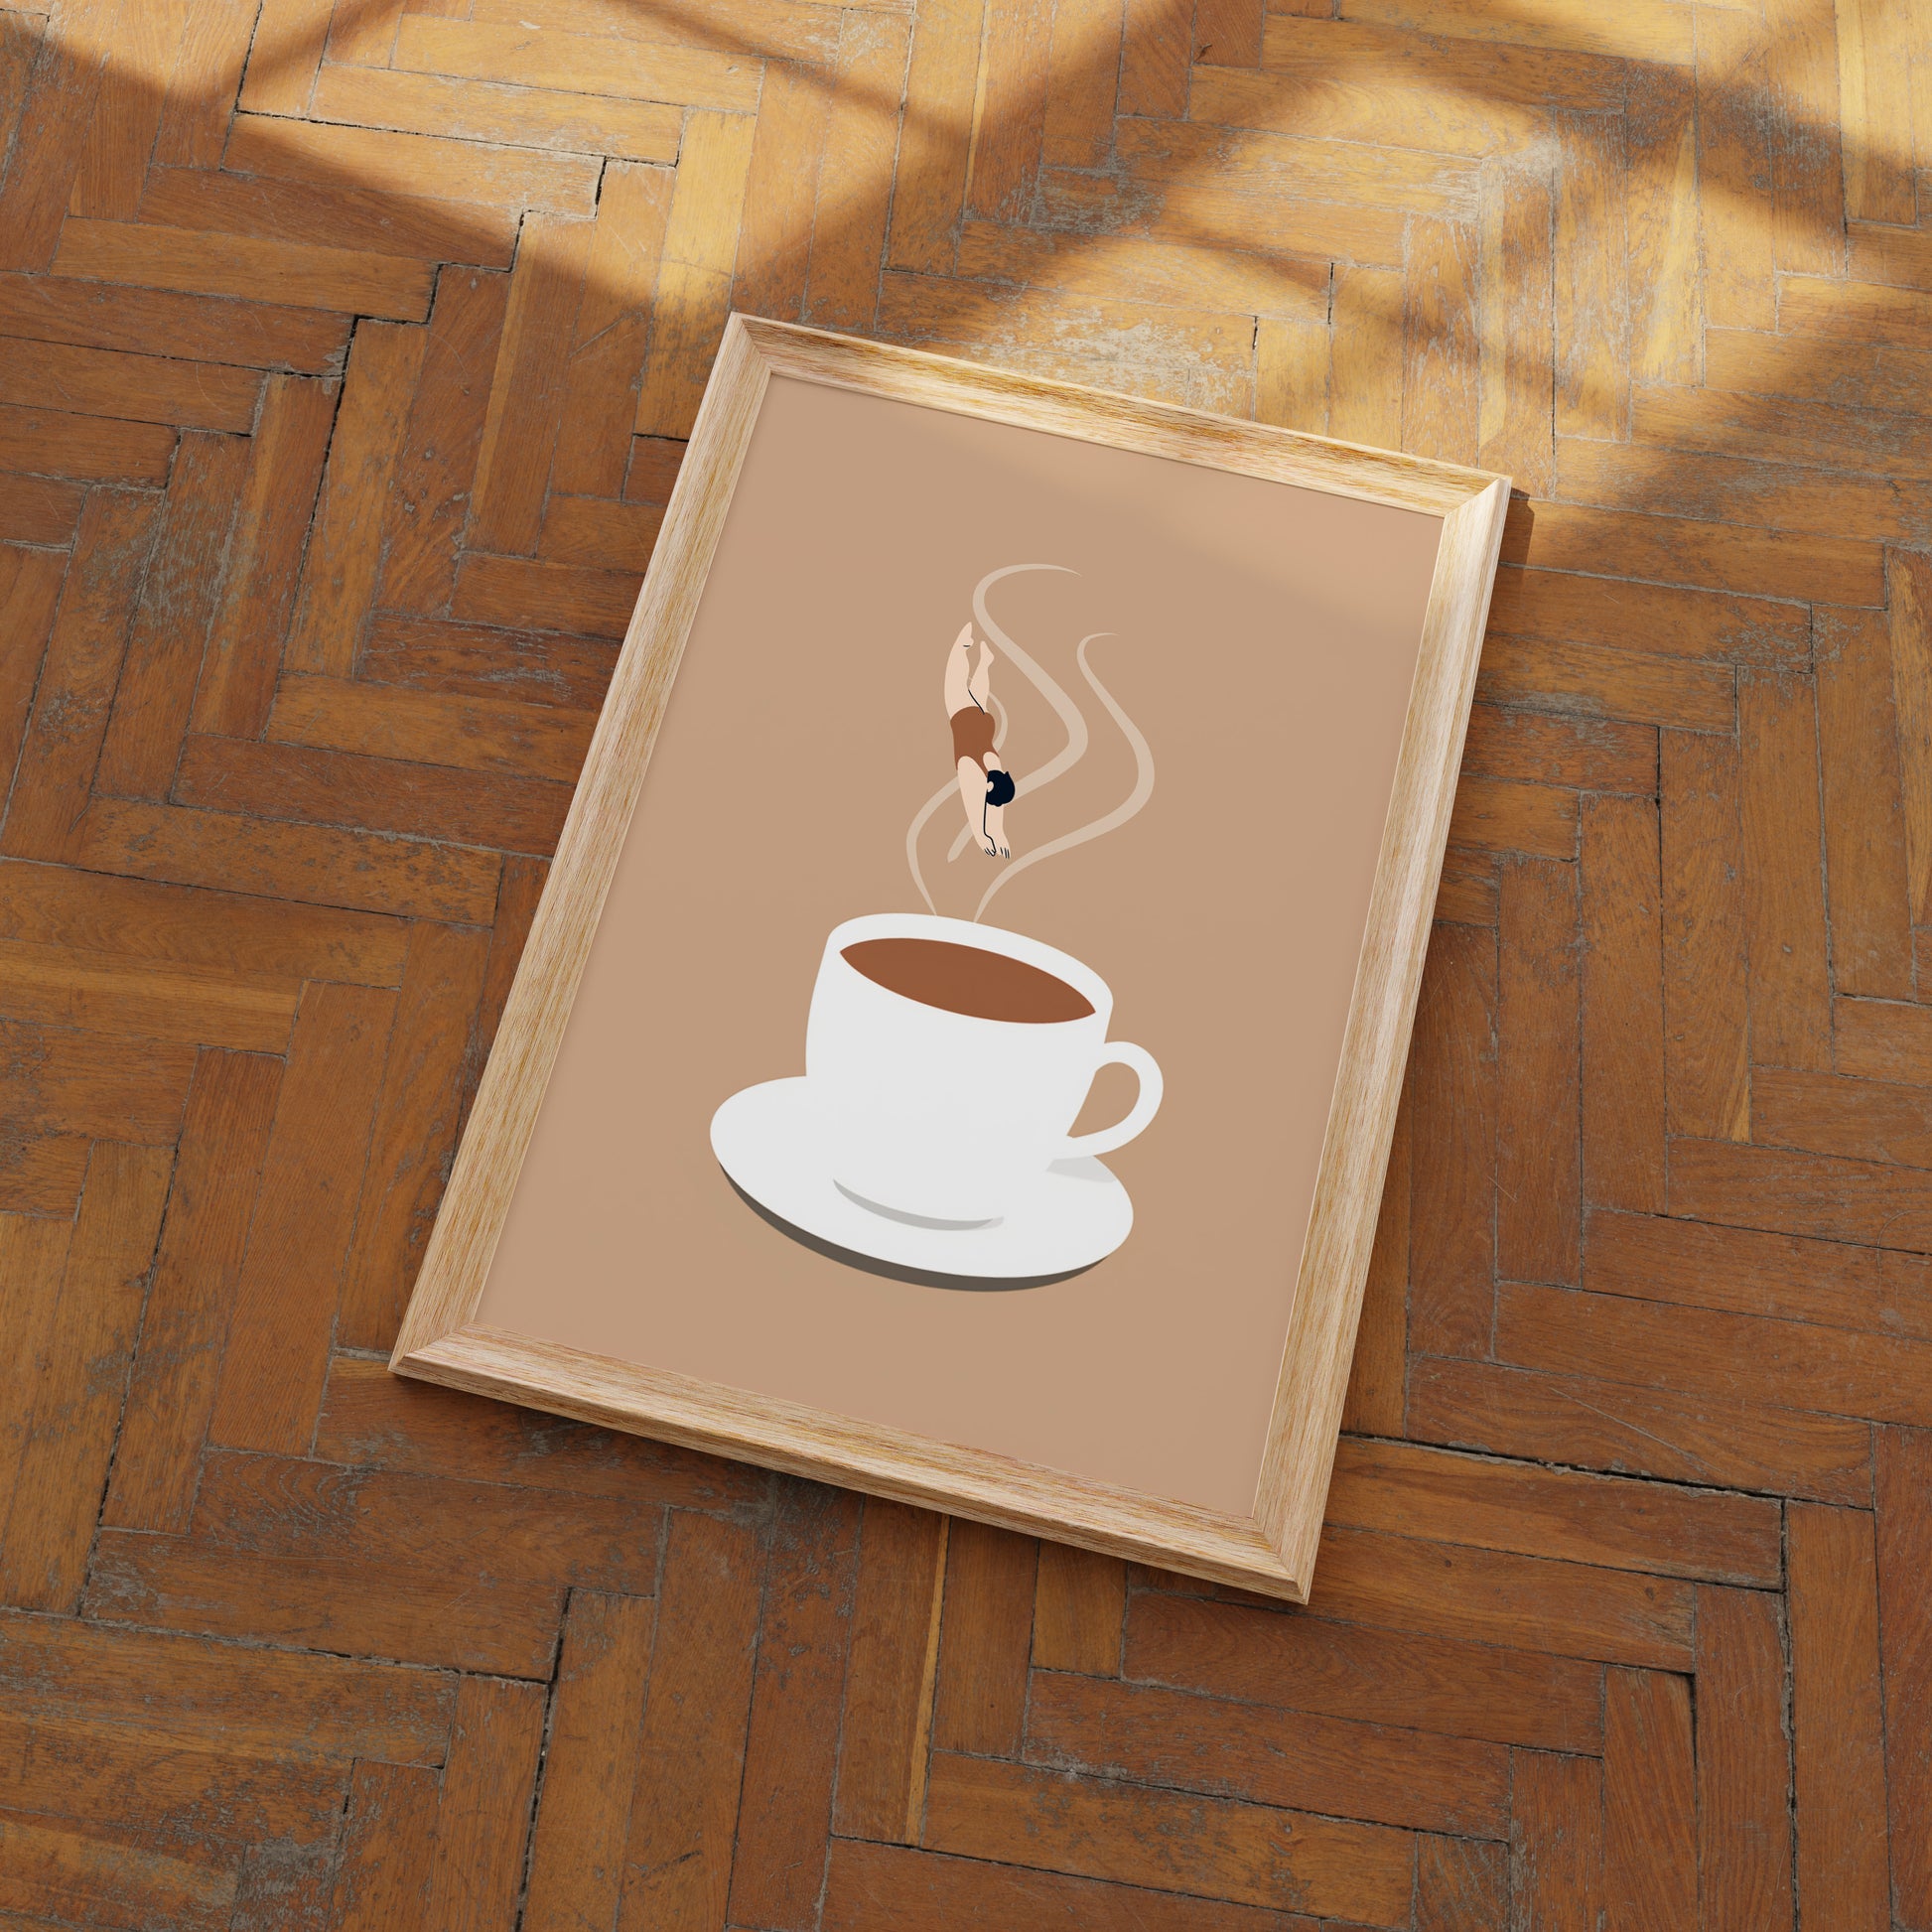 A framed picture of a coffee cup on a wooden floor.